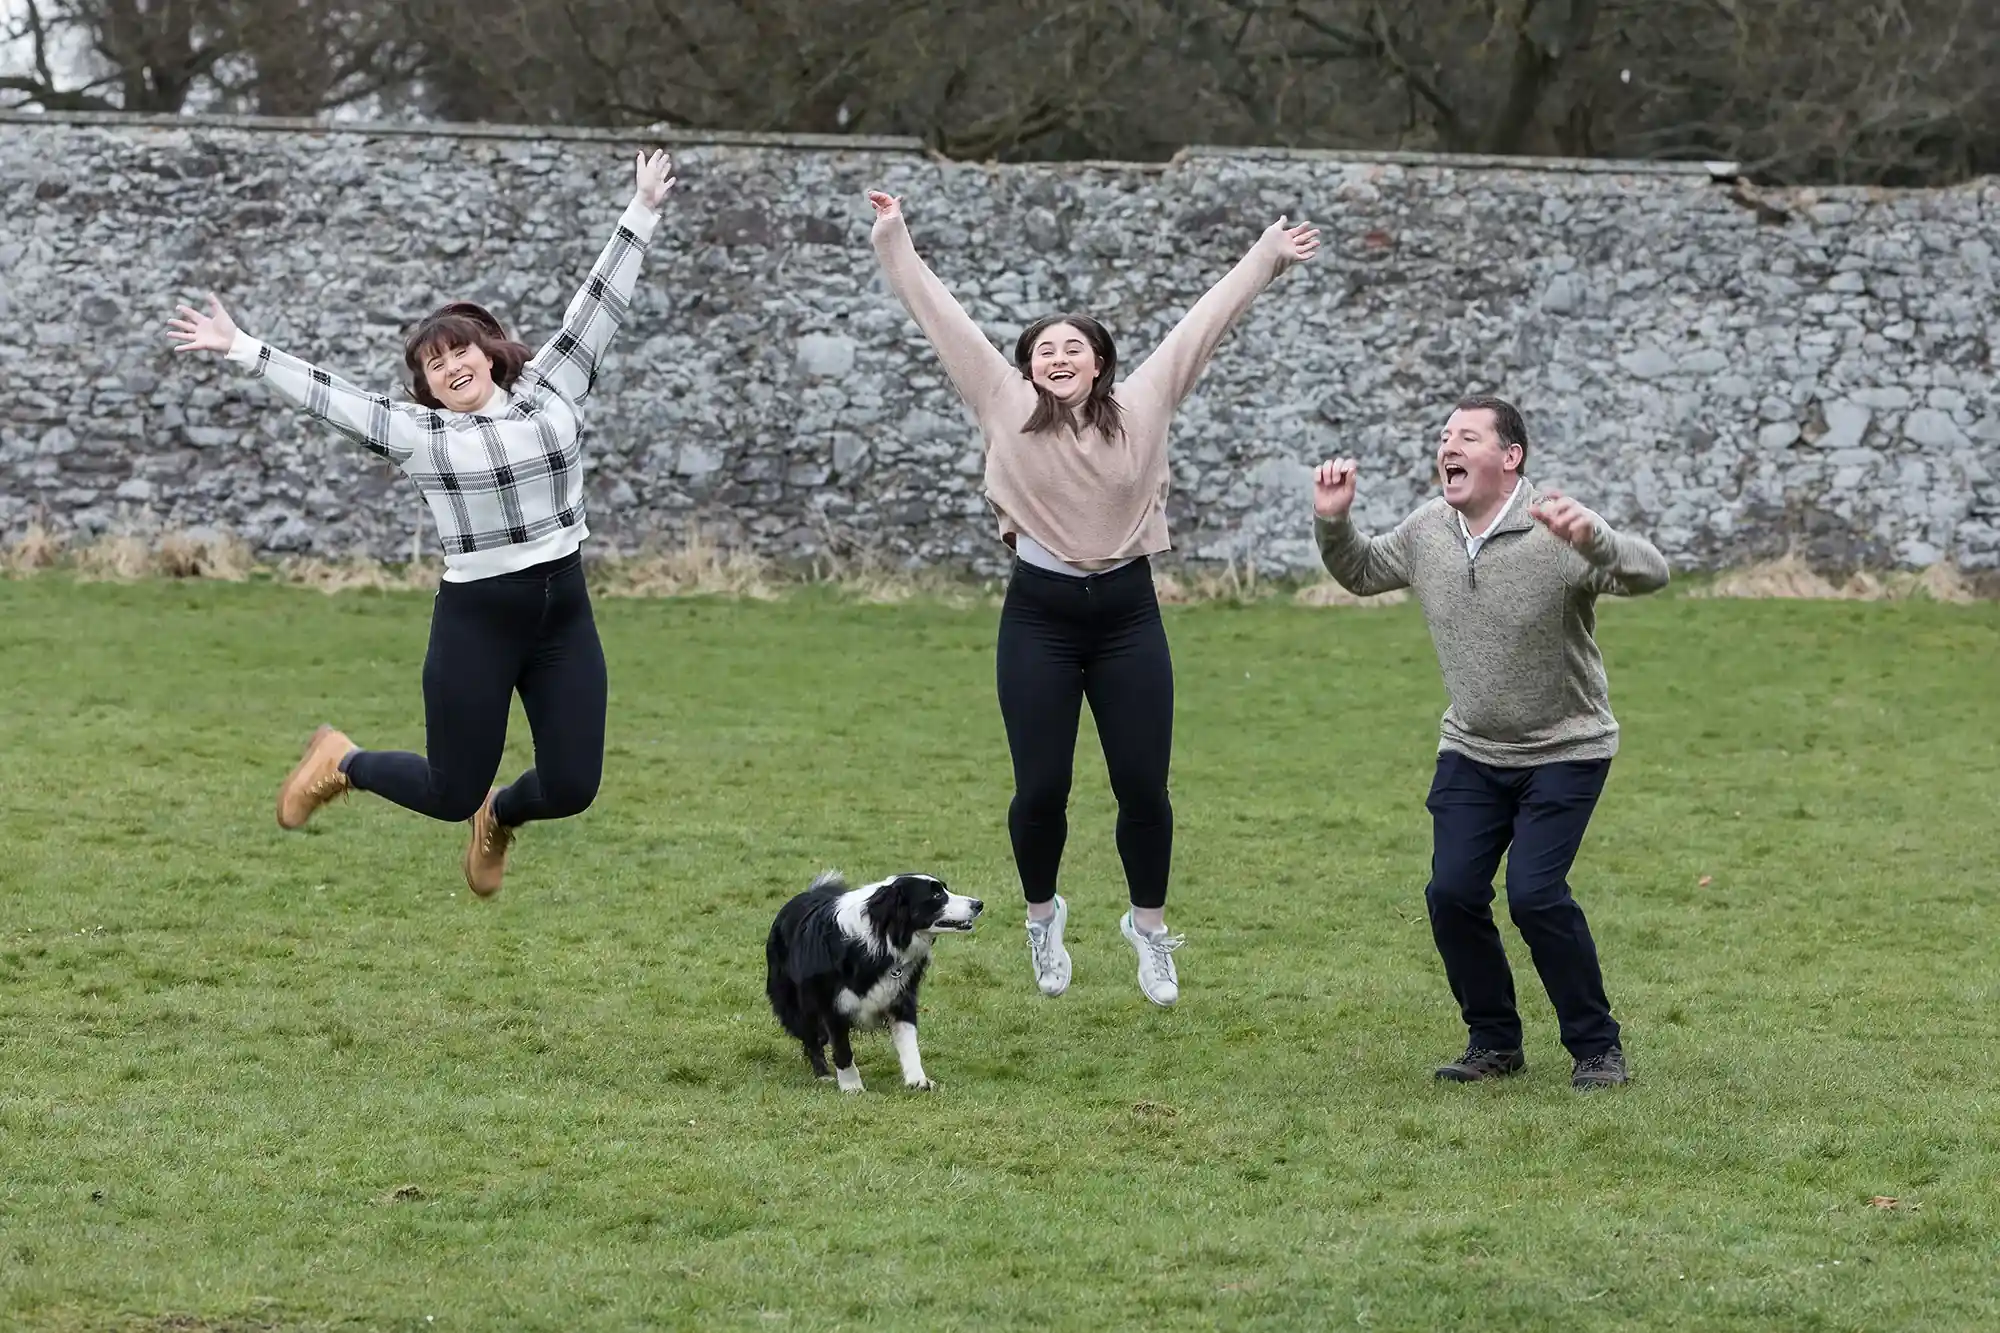 Three people and a dog are jumping in the air on a grassy field with a stone wall in the background.